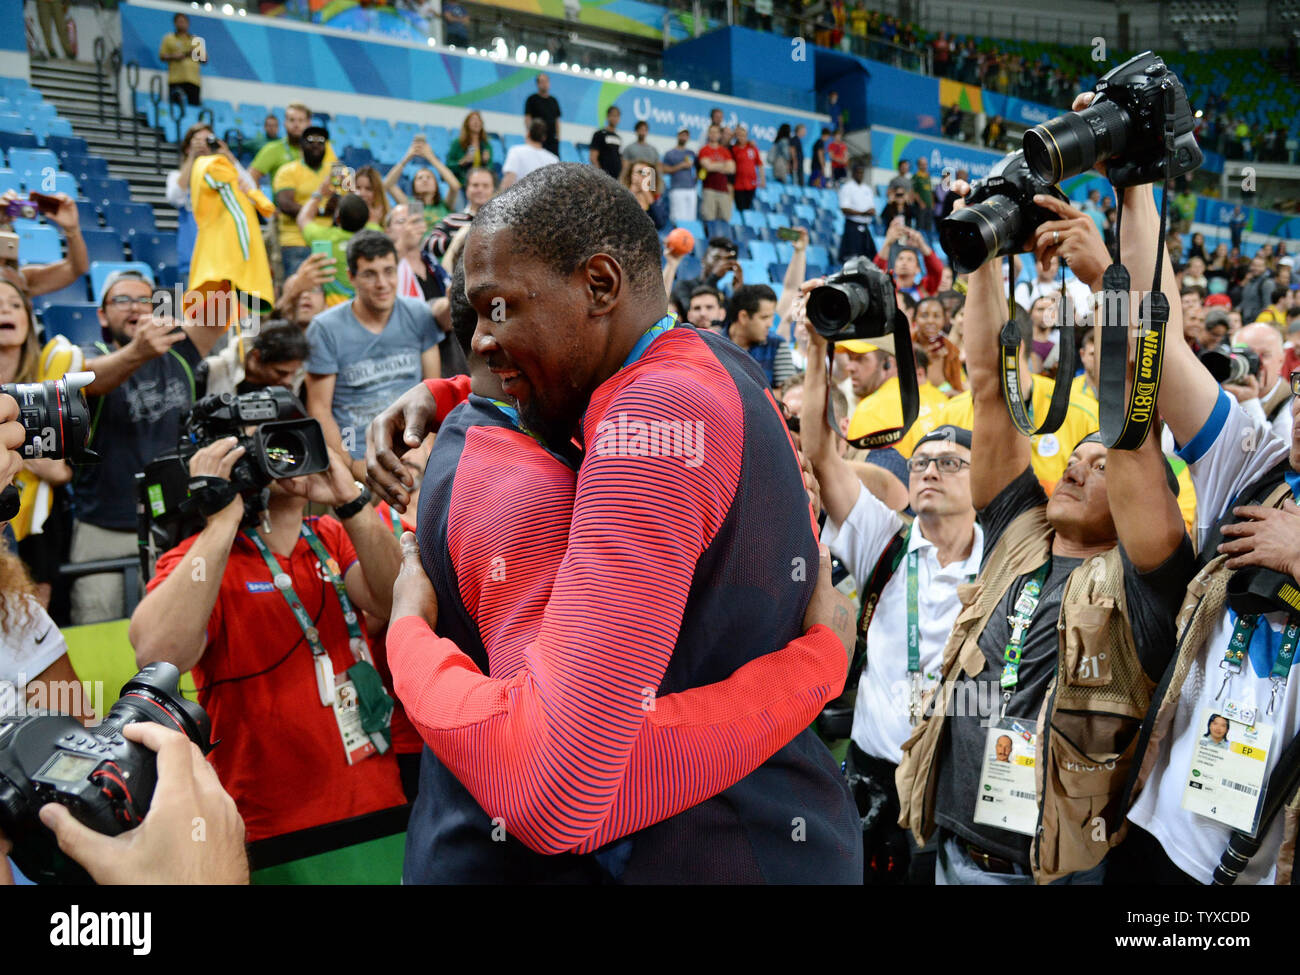 Kevin Durant of the United States celebrates after the game against Serbia in the Men's Basketball gold medal game between Serbia and the United States at Carioca Arena 1 at the 2016 Rio Summer Olympics in Rio de Janeiro, Brazil, on August 21, 2016. The United States defeated Serbia 96-66 to win its third consecutive gold medal.  Photo by Kevin Dietsch/UPI Stock Photo